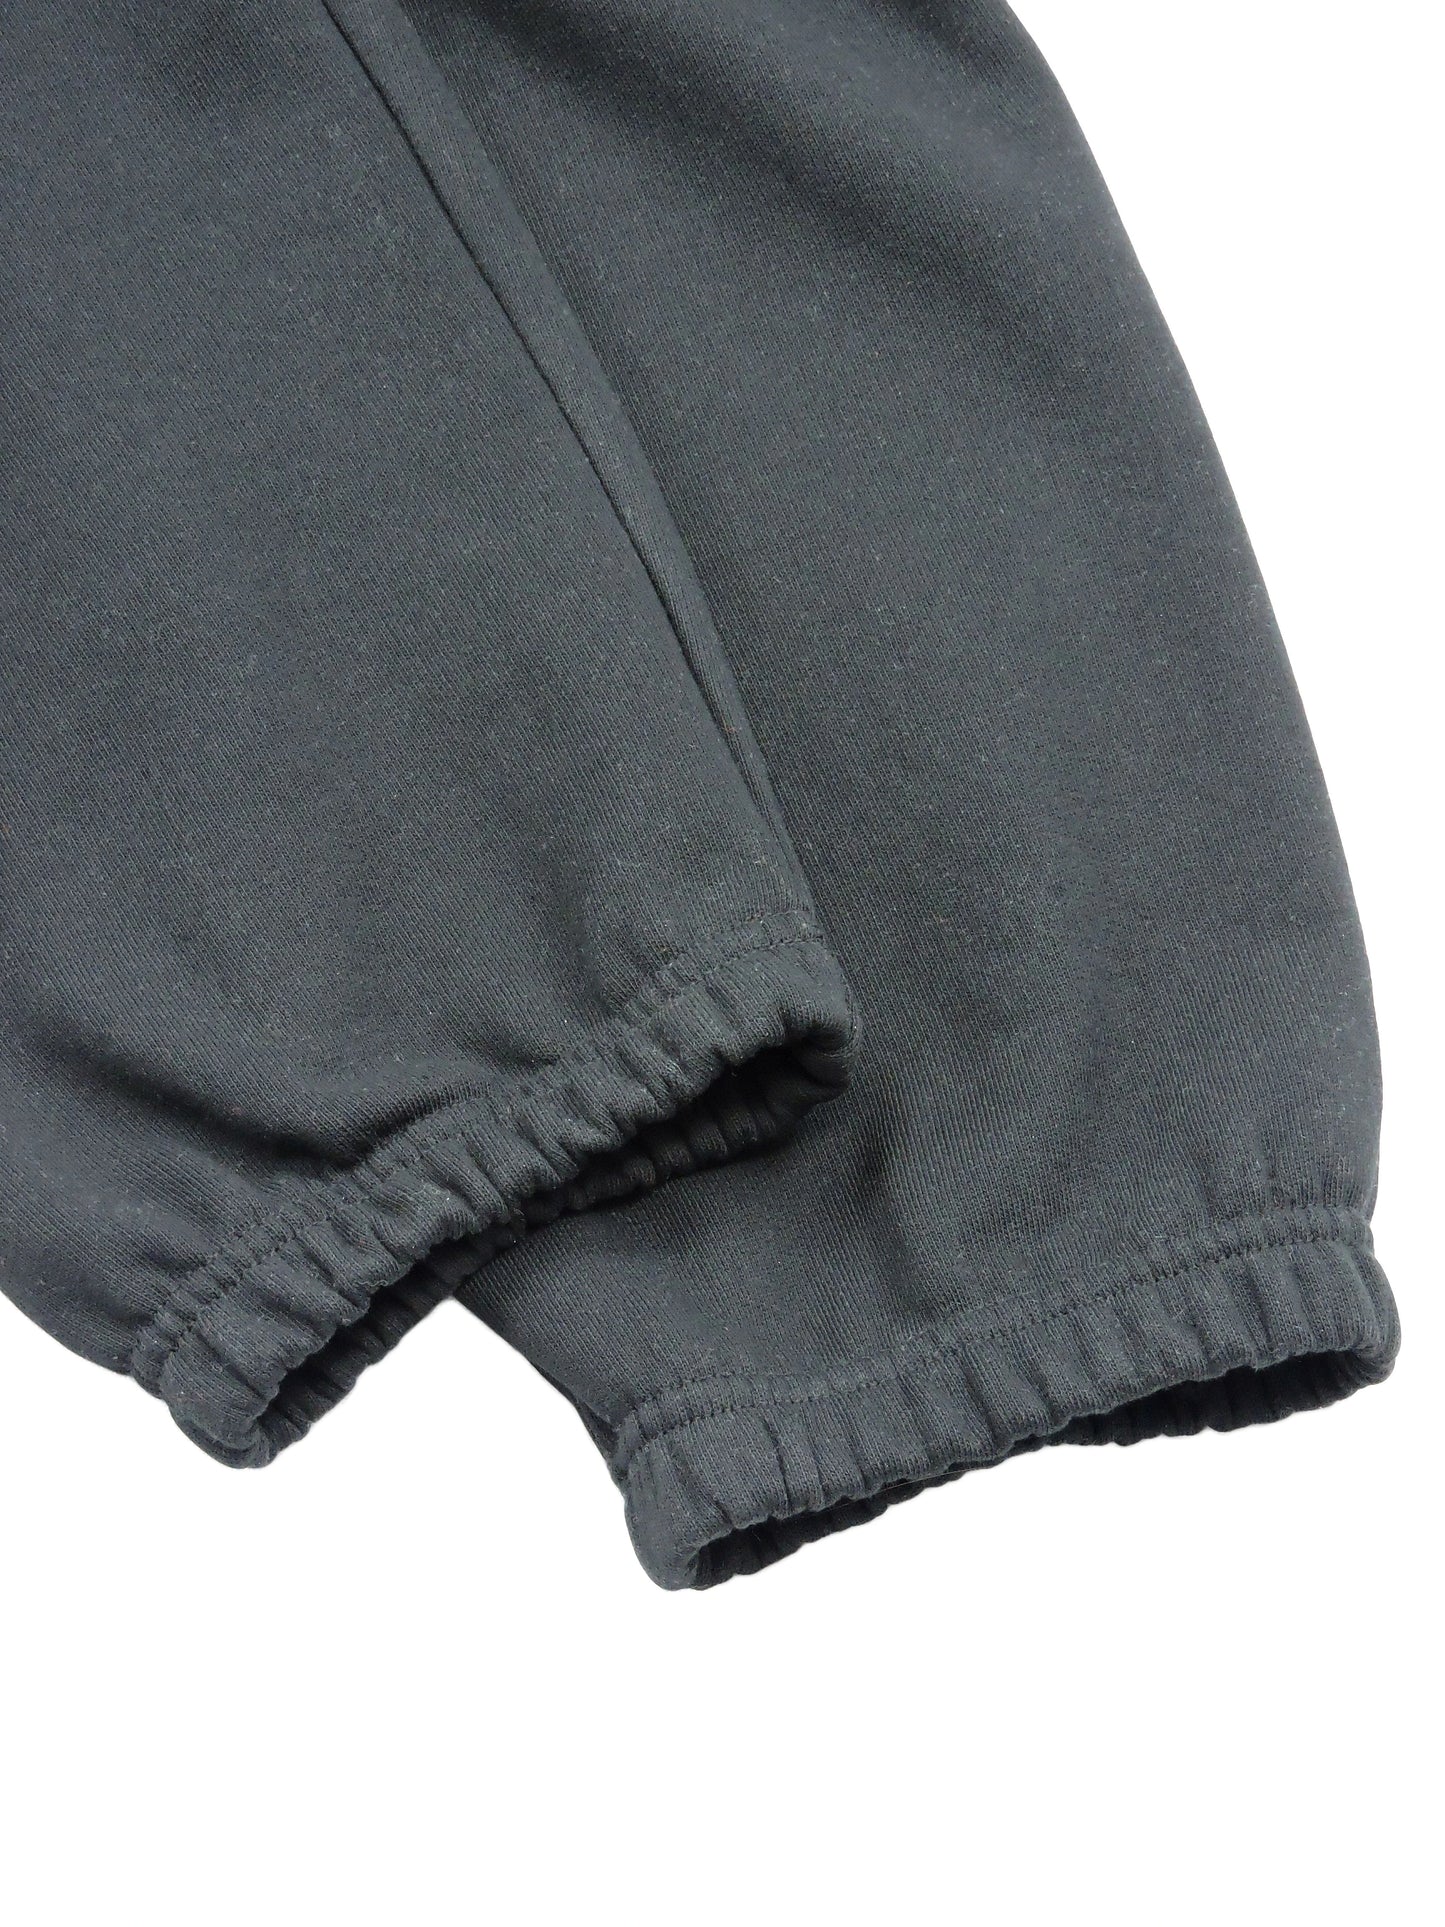 Ankle Cuffs of French Terry Sweatpants